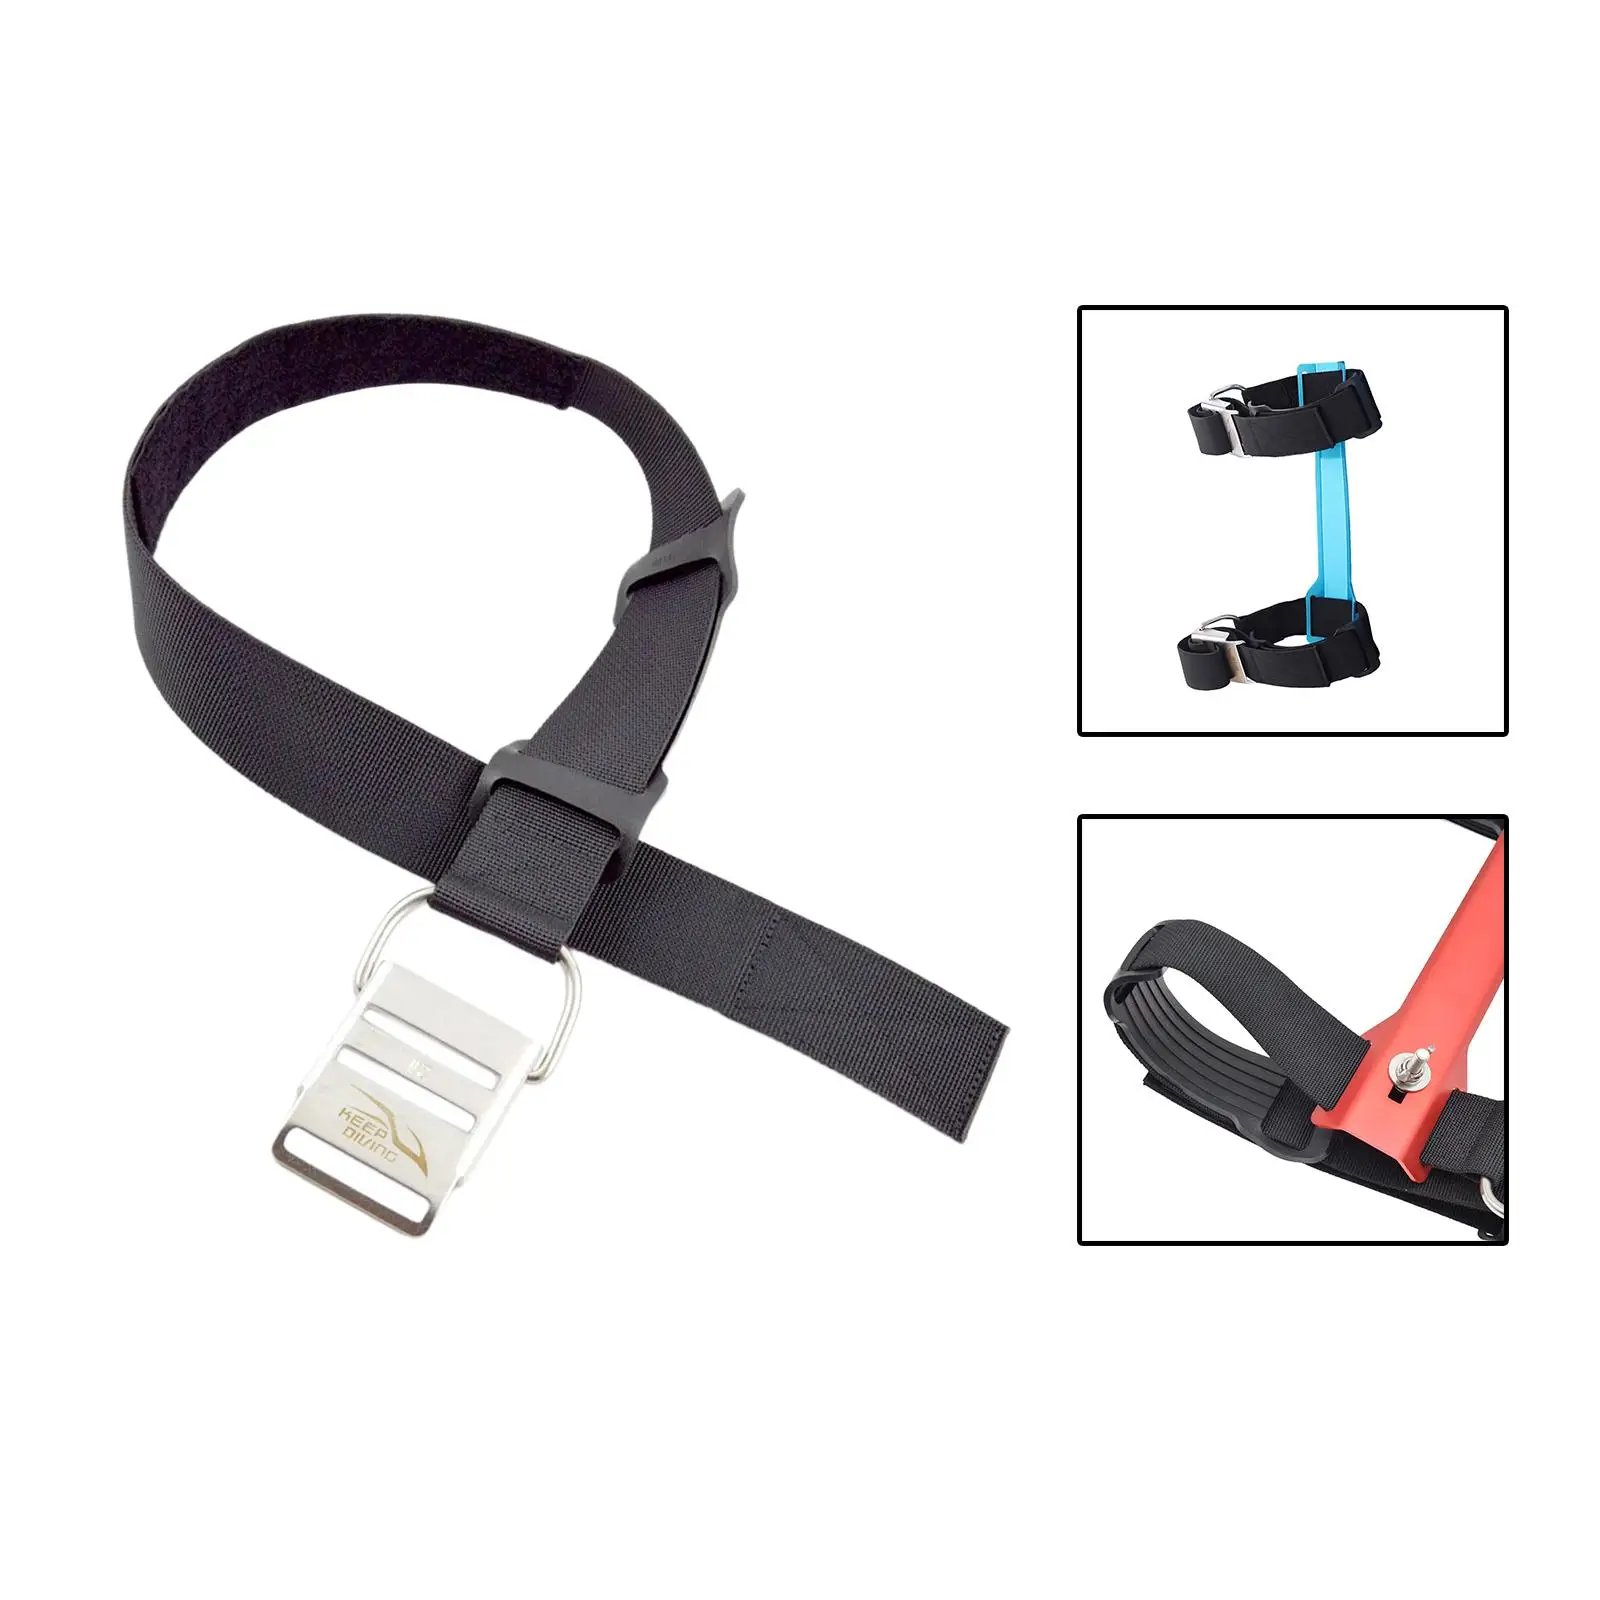 

Scuba Diving Tank Strap with Stainless Steel Buckle Adjustable, Lightweight for 12L-14L Cylinder for Swimming ,Snorkeling